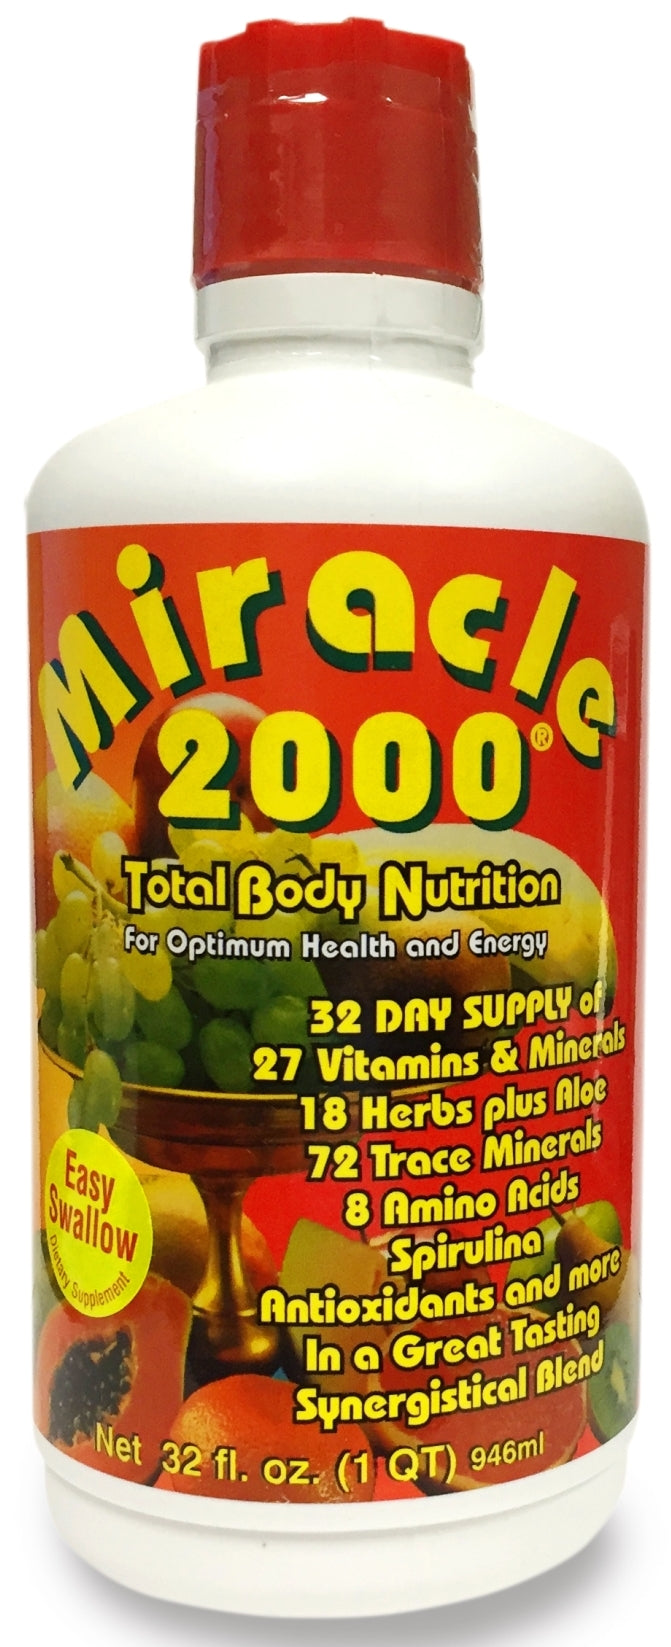 Miracle 2000 Energy Total Body Nutrition 32 fl oz